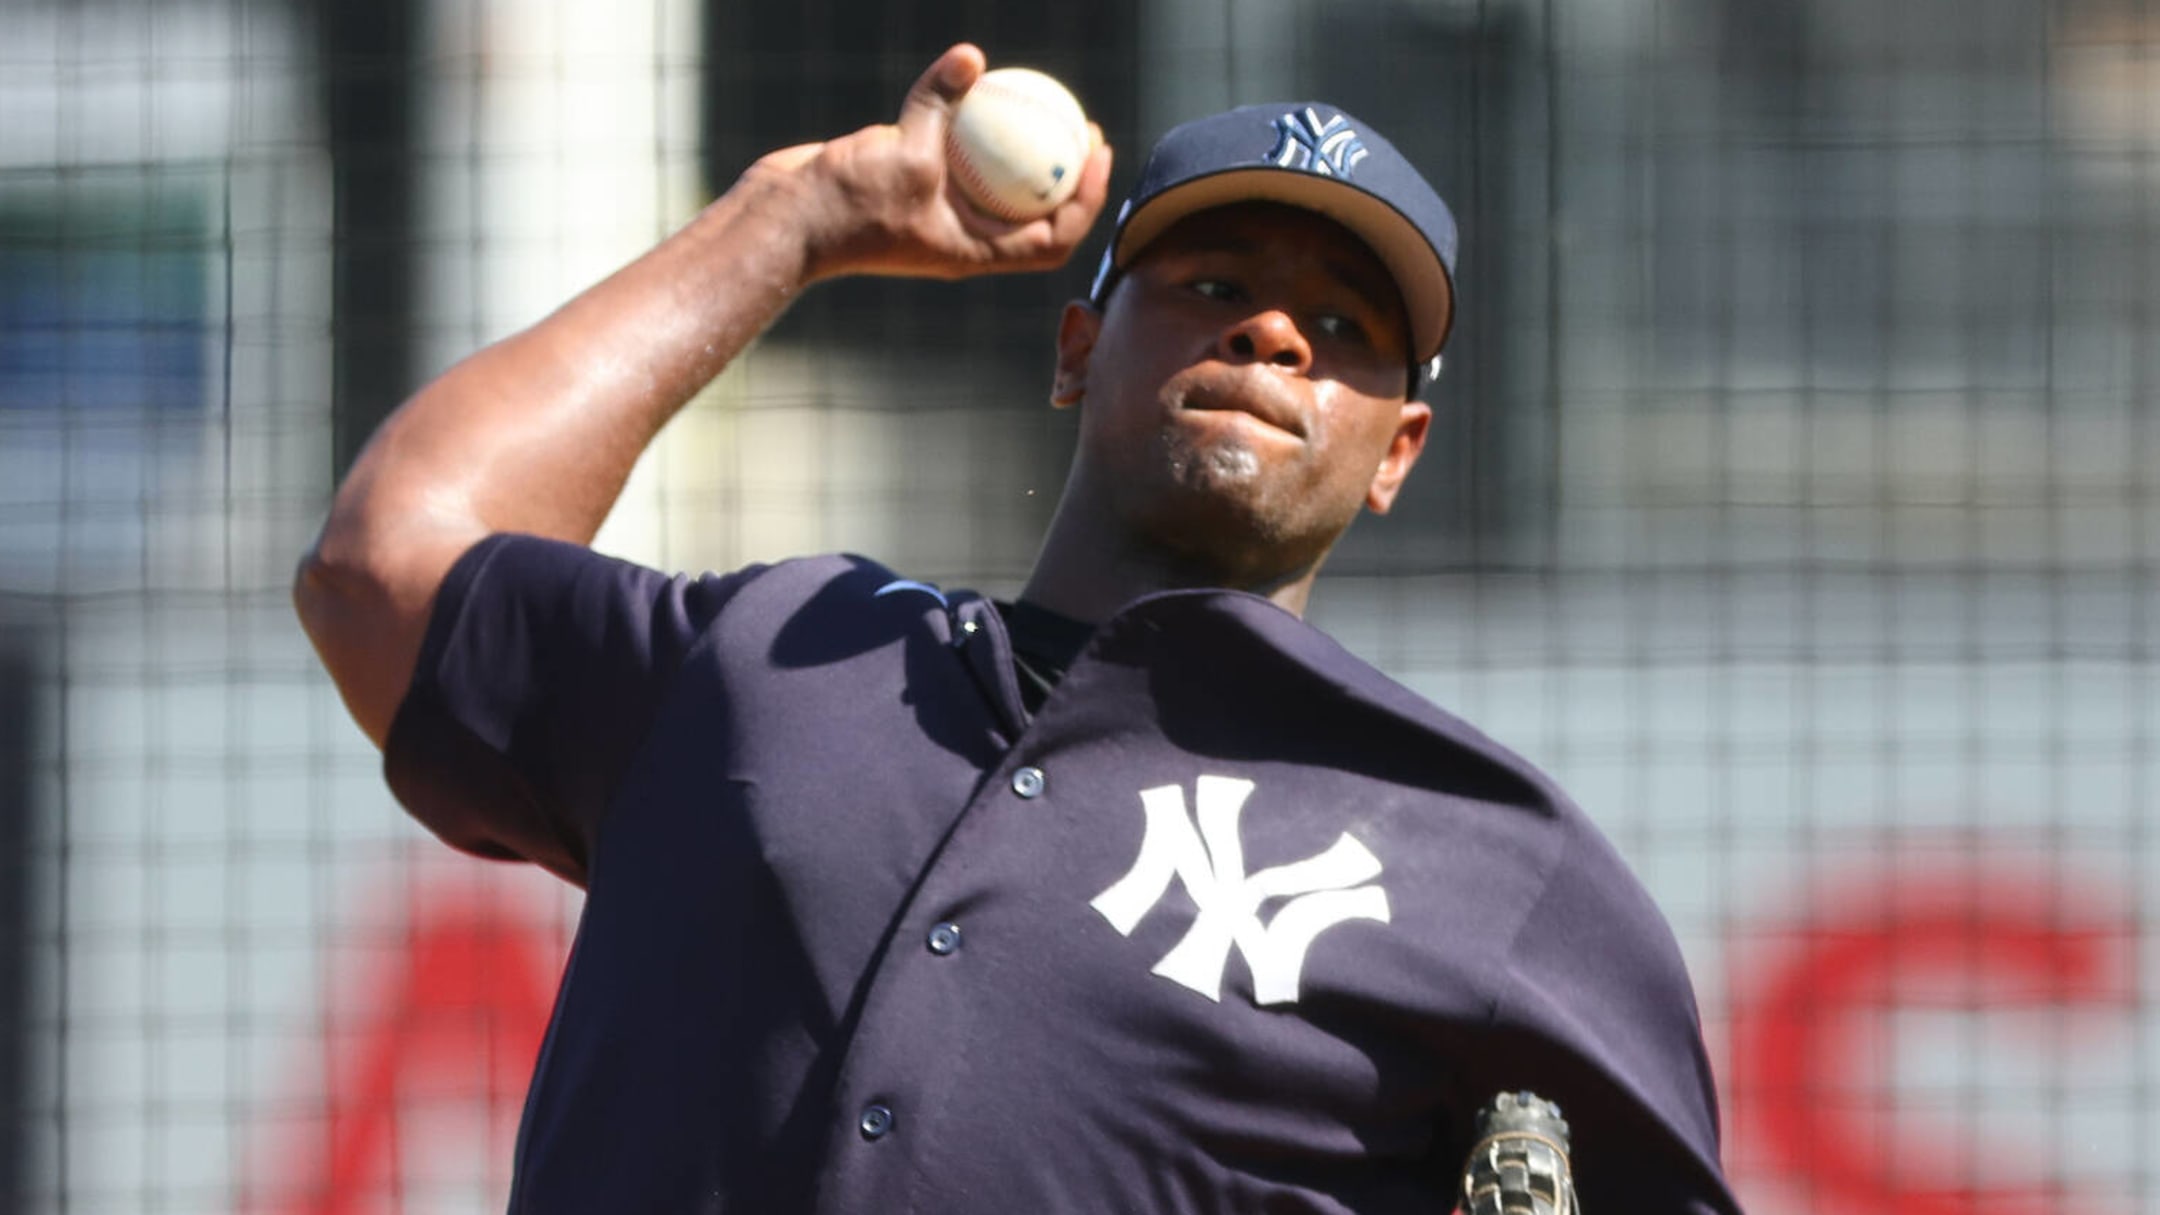 Yankees place Luis Severino on IL with Lat Sprain 